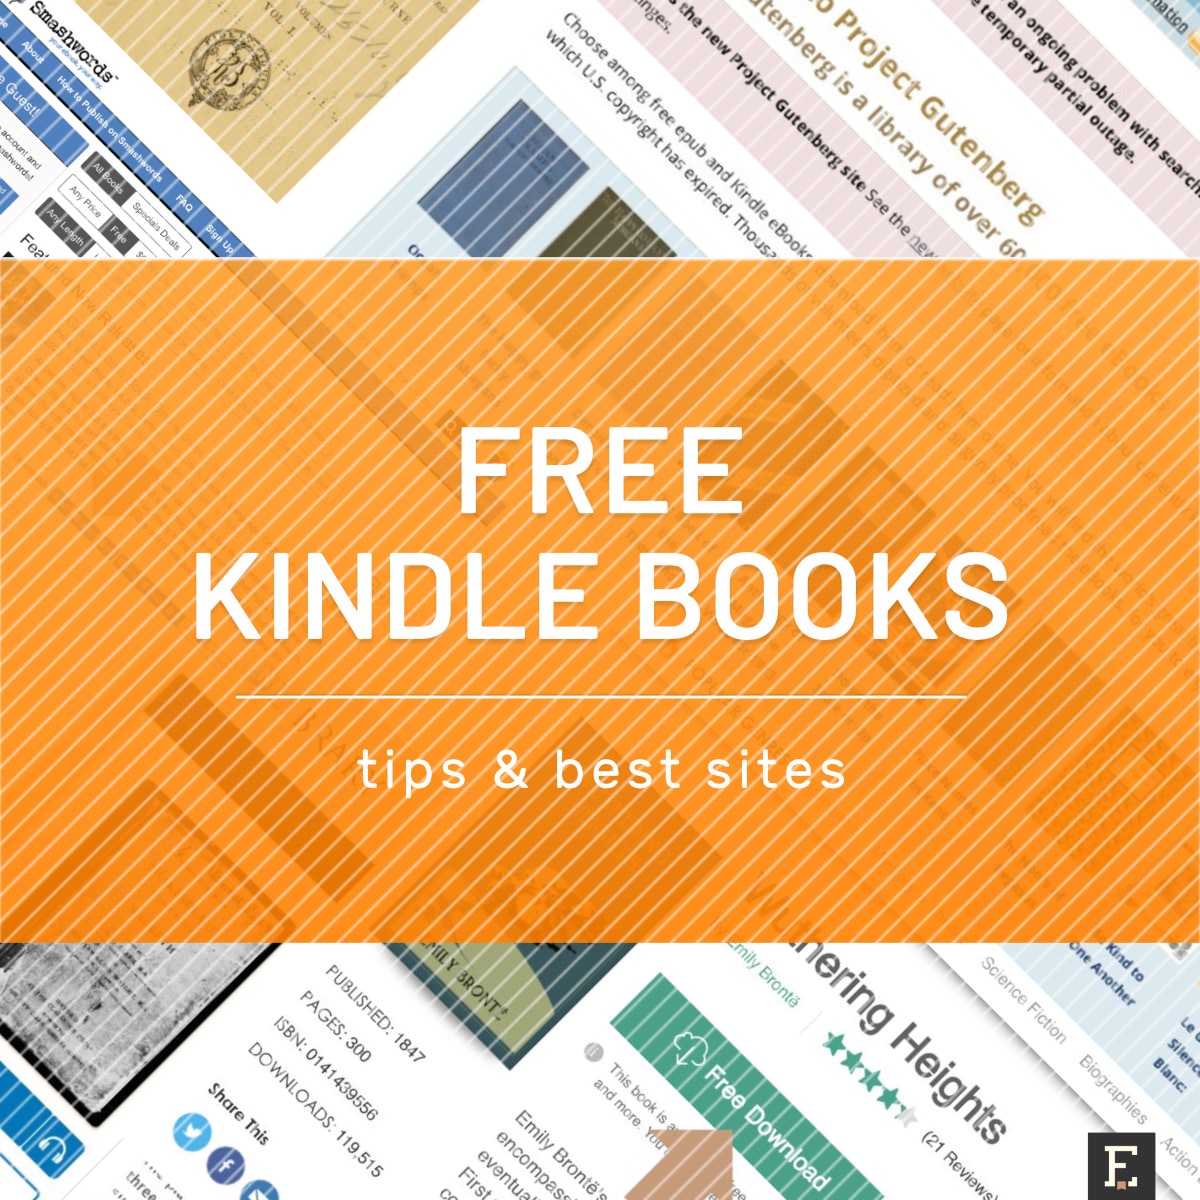 Download free books for Kindle – sources and tips